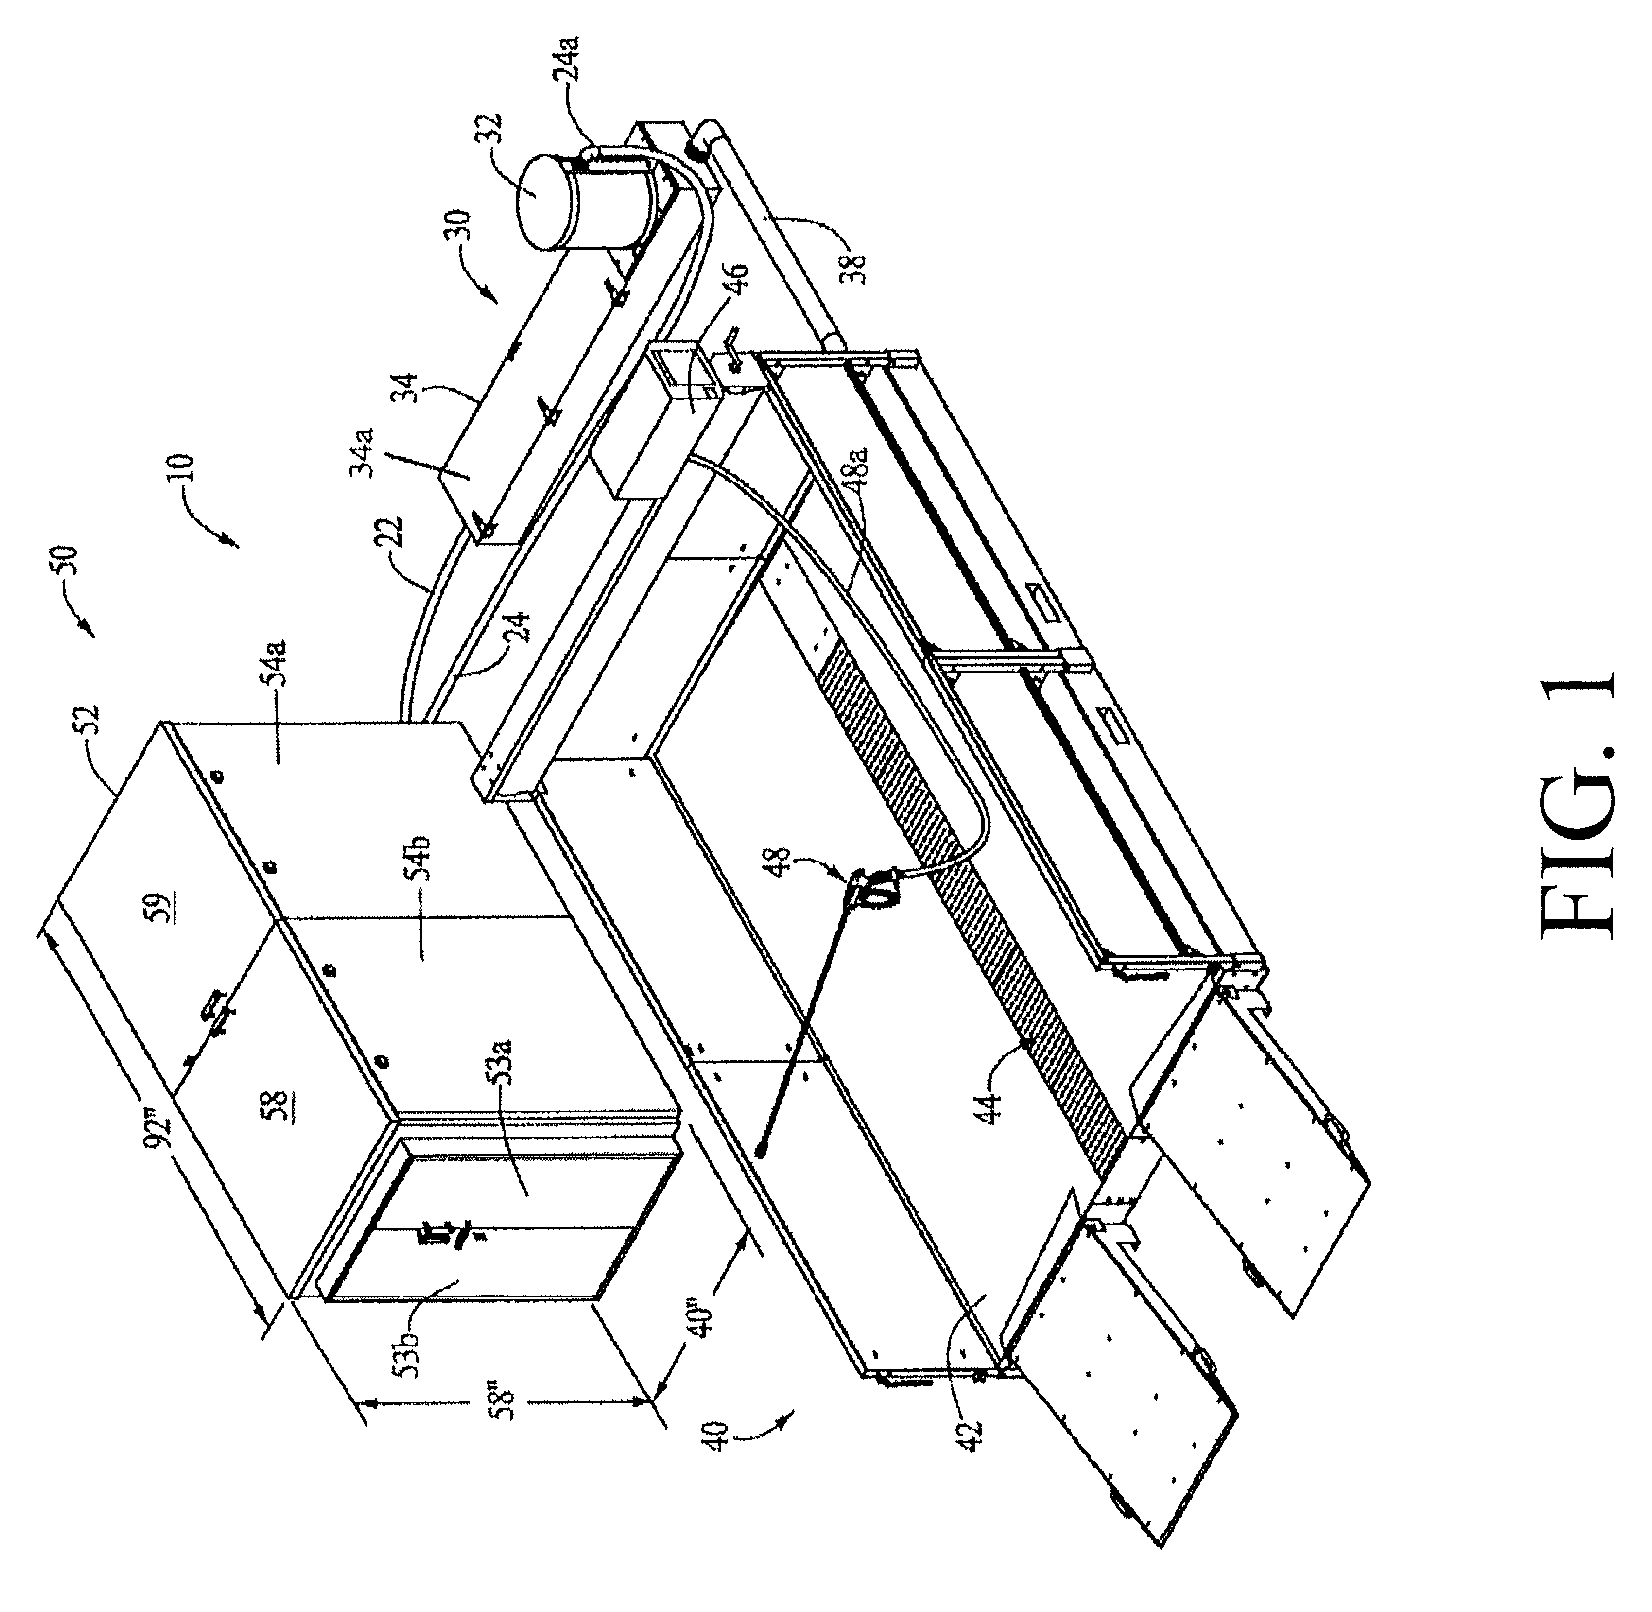 Immediate cleaning and recirculation of cleaning fluid and method of using same